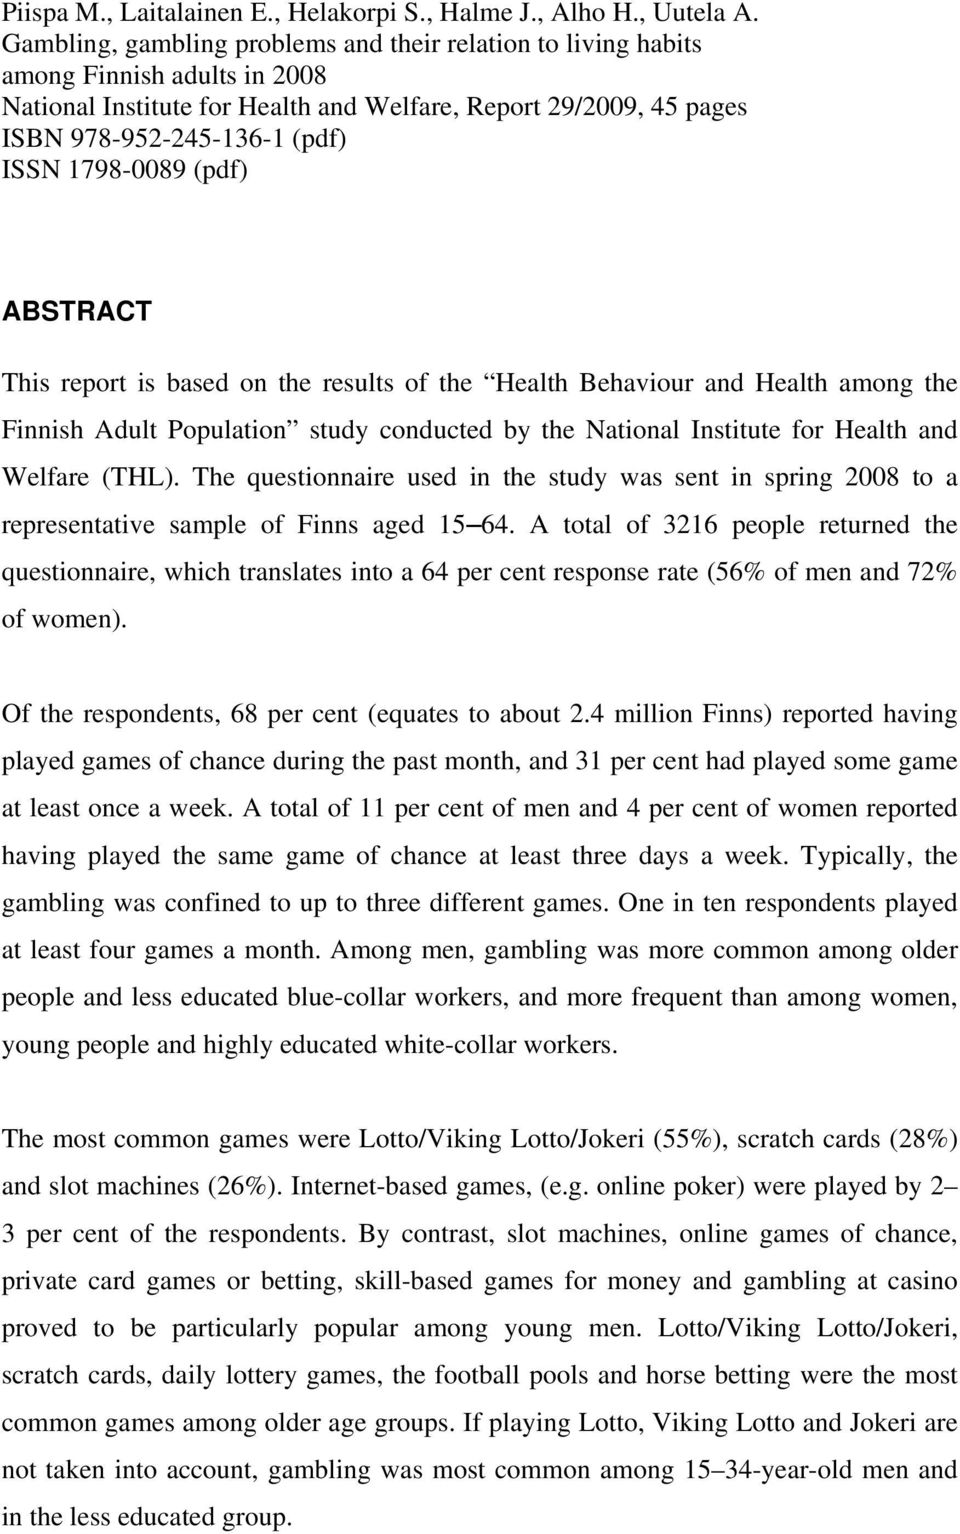 1798-0089 (pdf) ABSTRACT This report is based on the results of the Health Behaviour and Health among the Finnish Adult Population study conducted by the National Institute for Health and Welfare